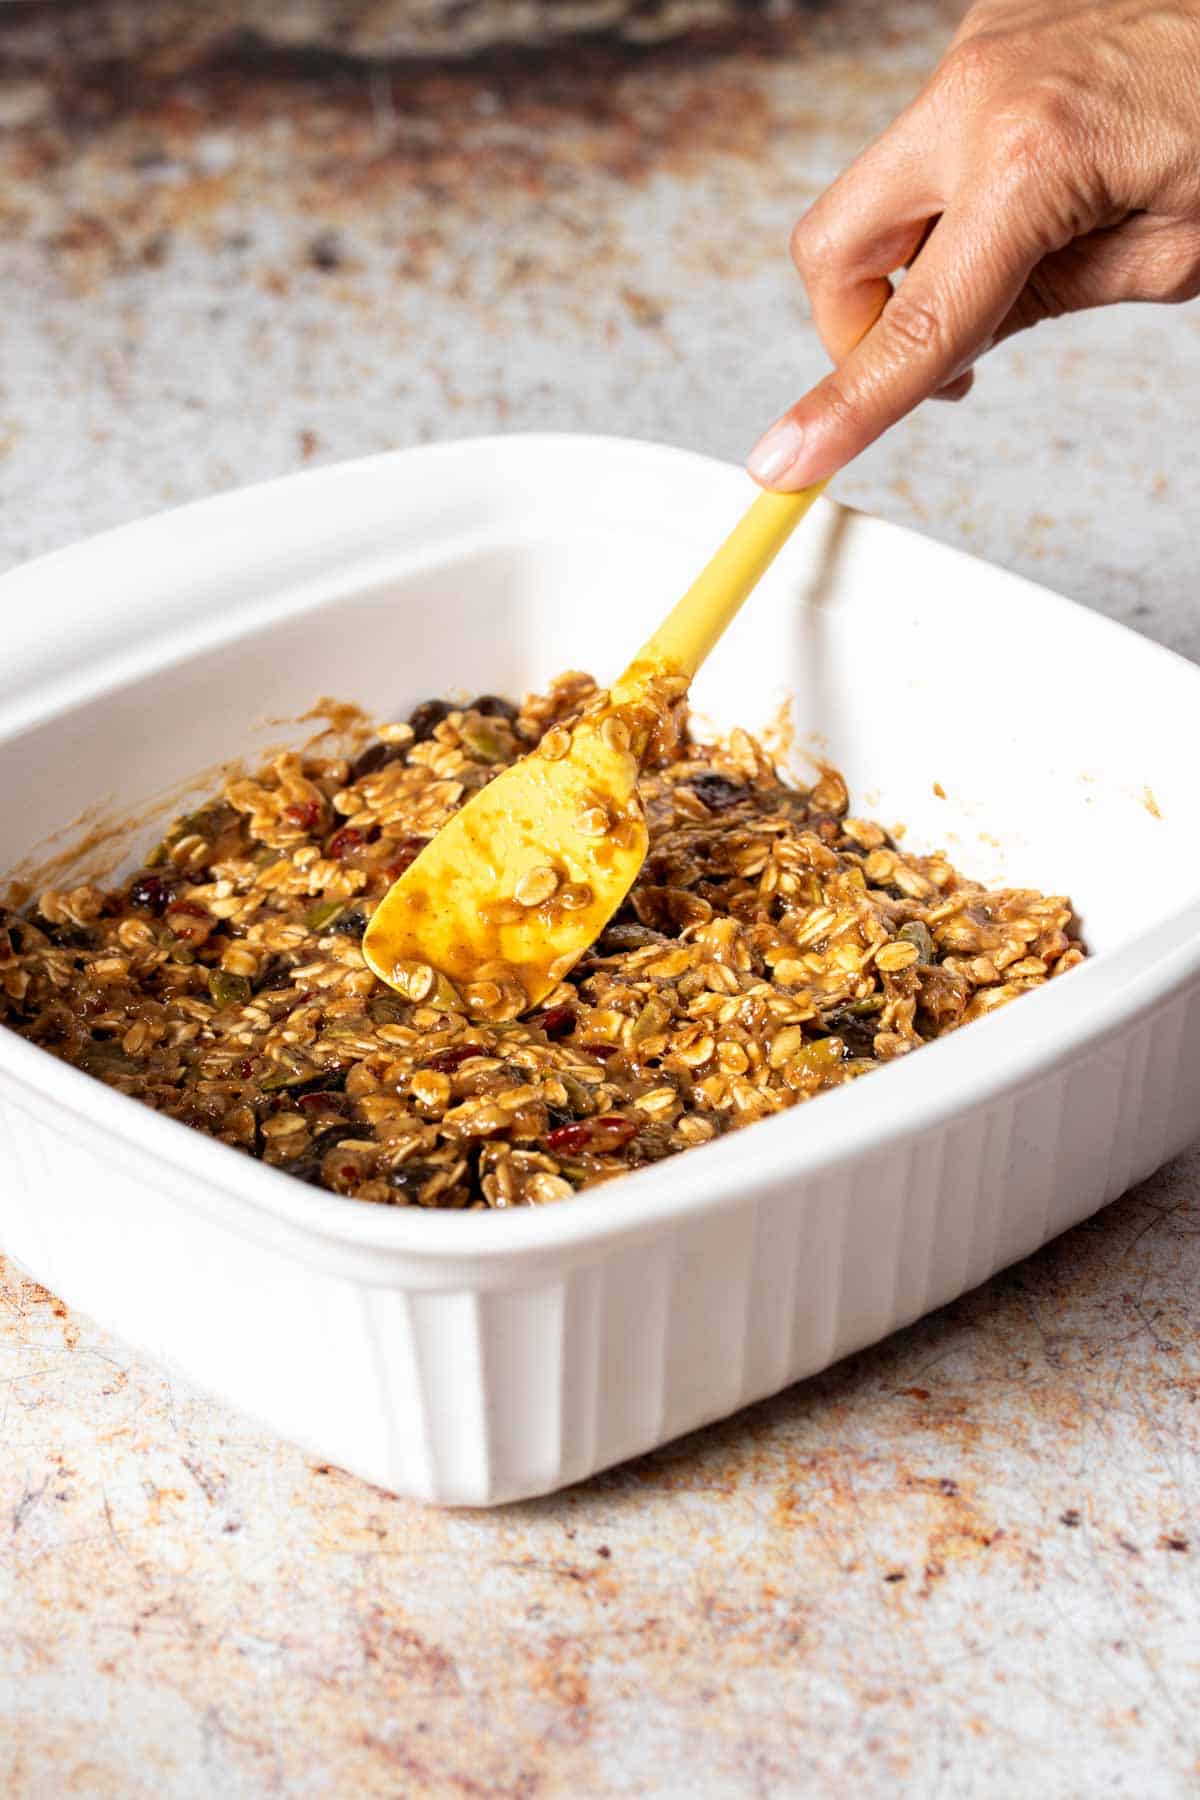 A hand using a yellow spatula to smooth out raw dough with oats in it into a white baking dish.